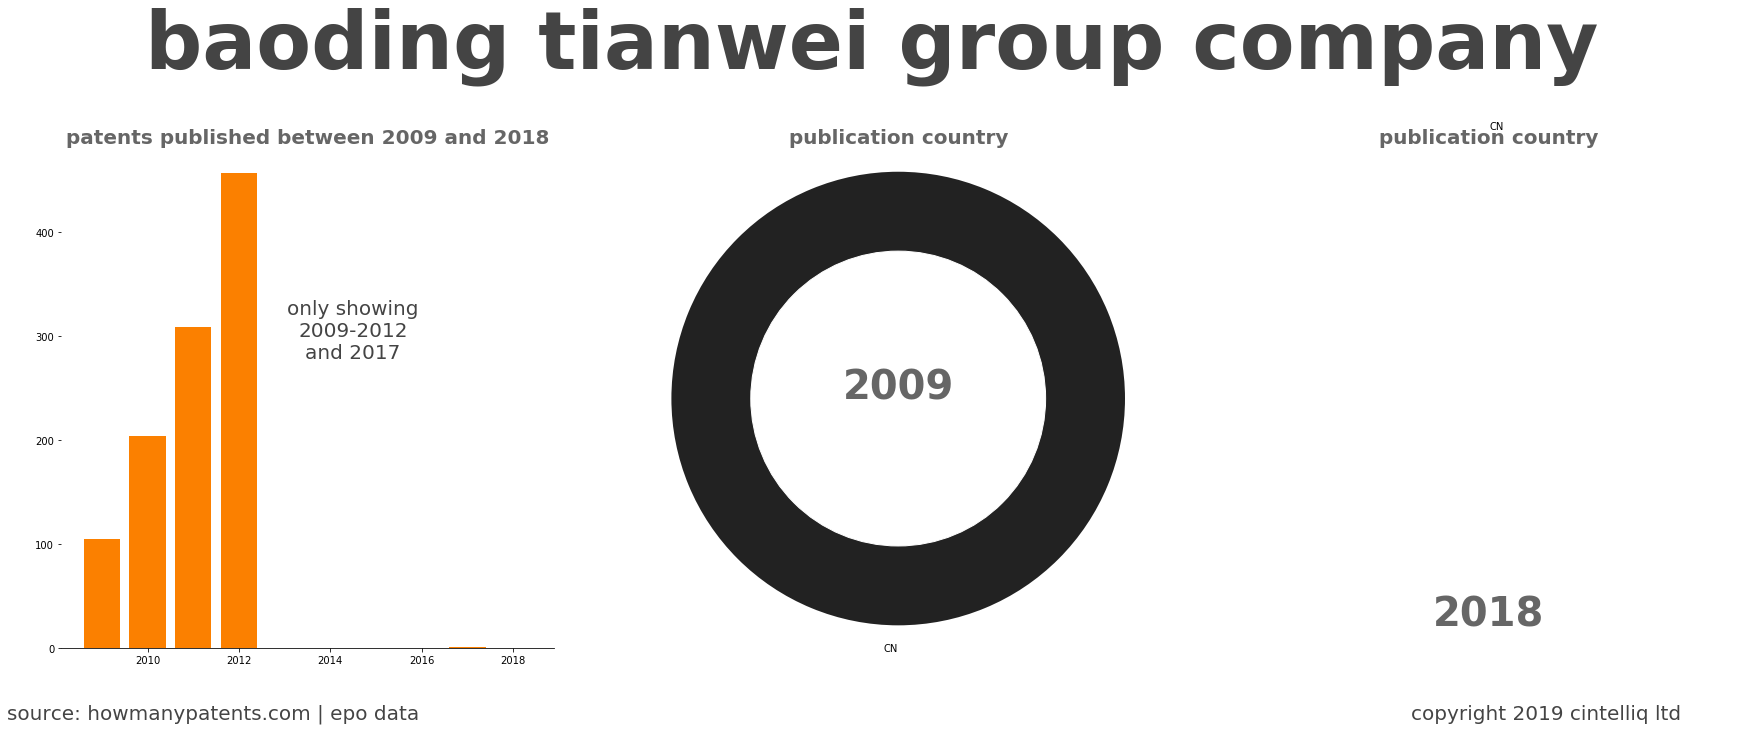 summary of patents for Baoding Tianwei Group Company